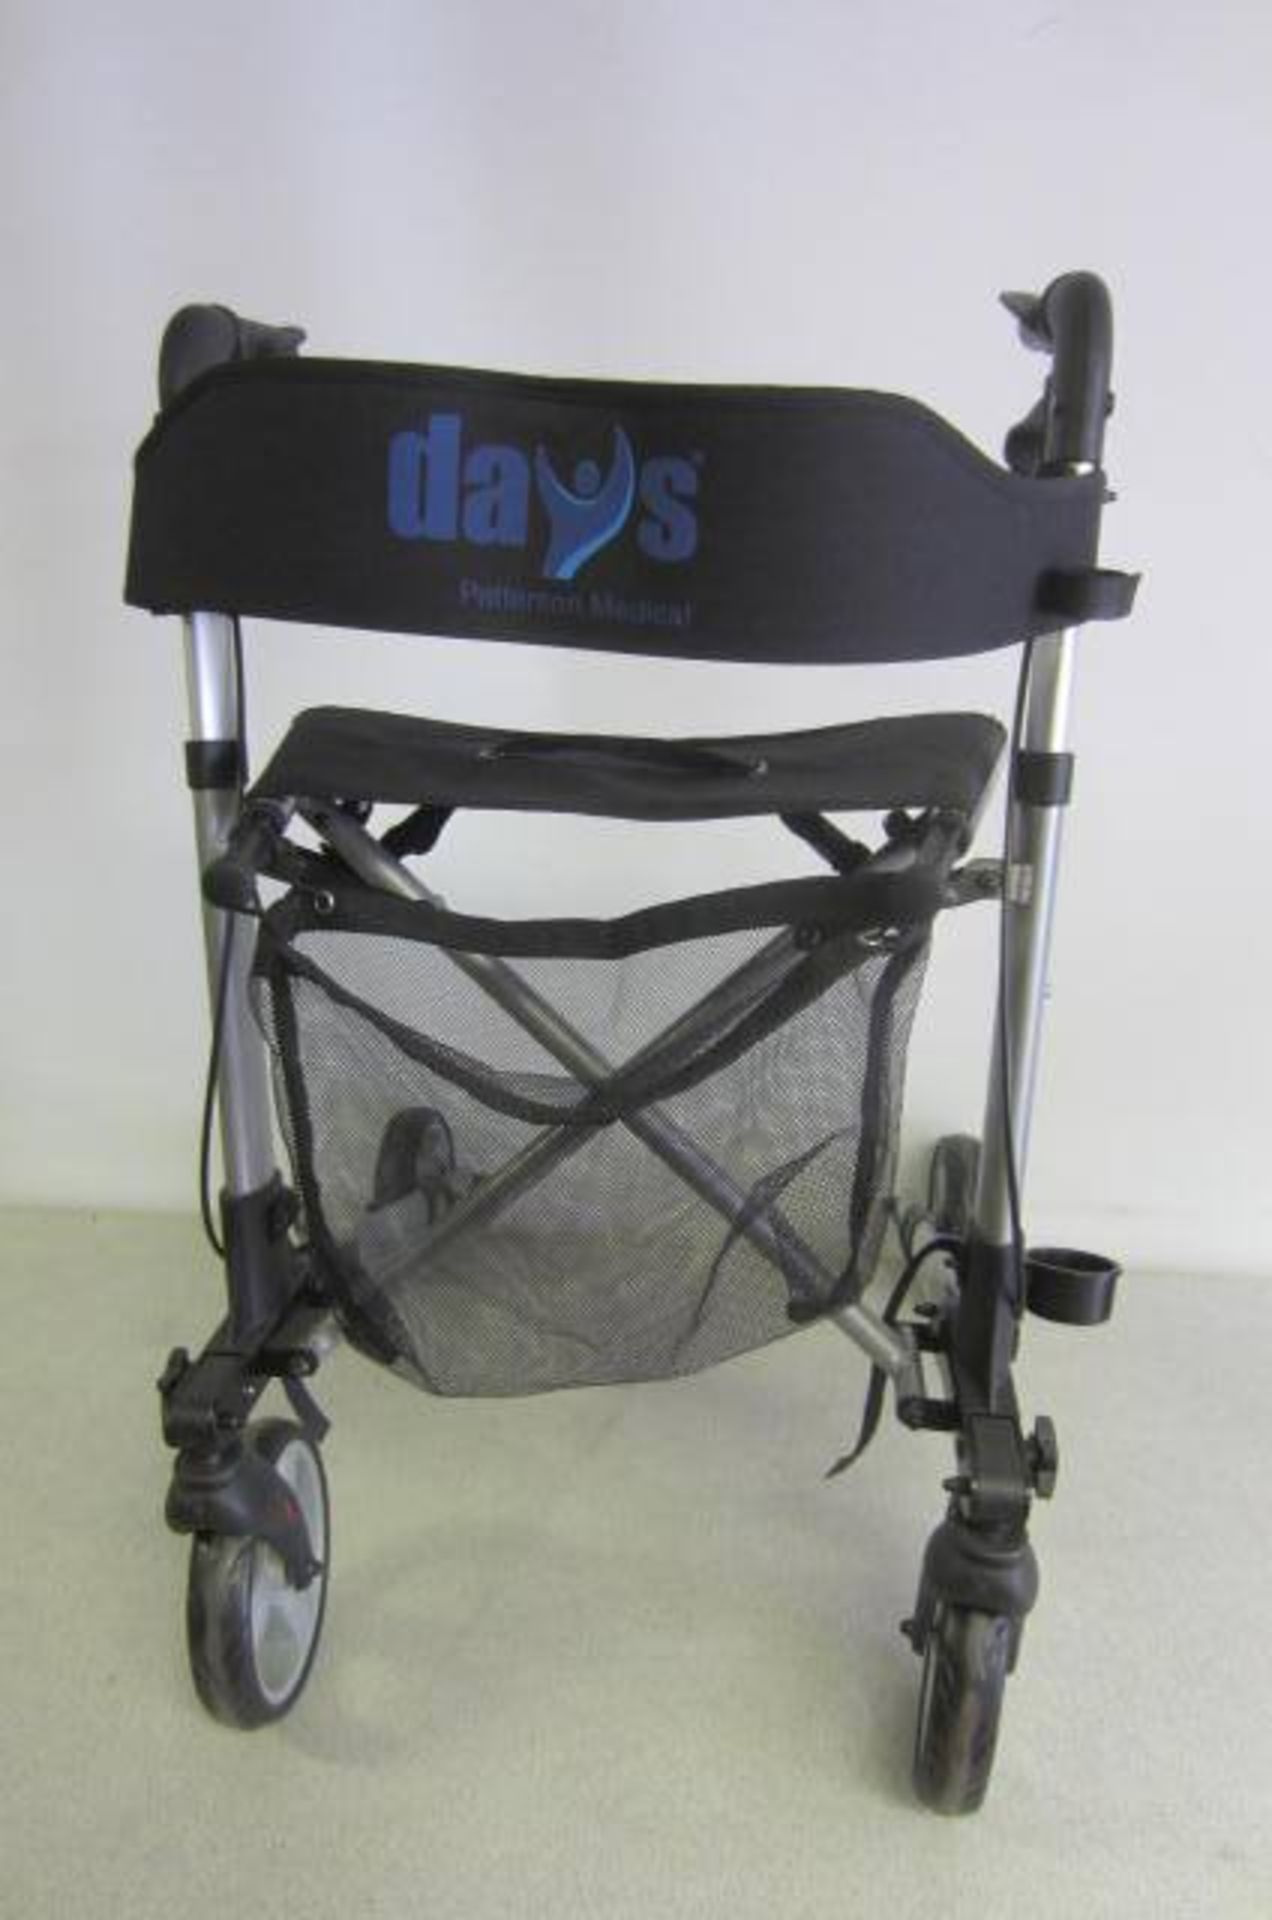 Days Patterson Medical Deluxe Rollator, Lightweight Folding 4 Wheel Rollator Walker with Seat & - Image 2 of 3